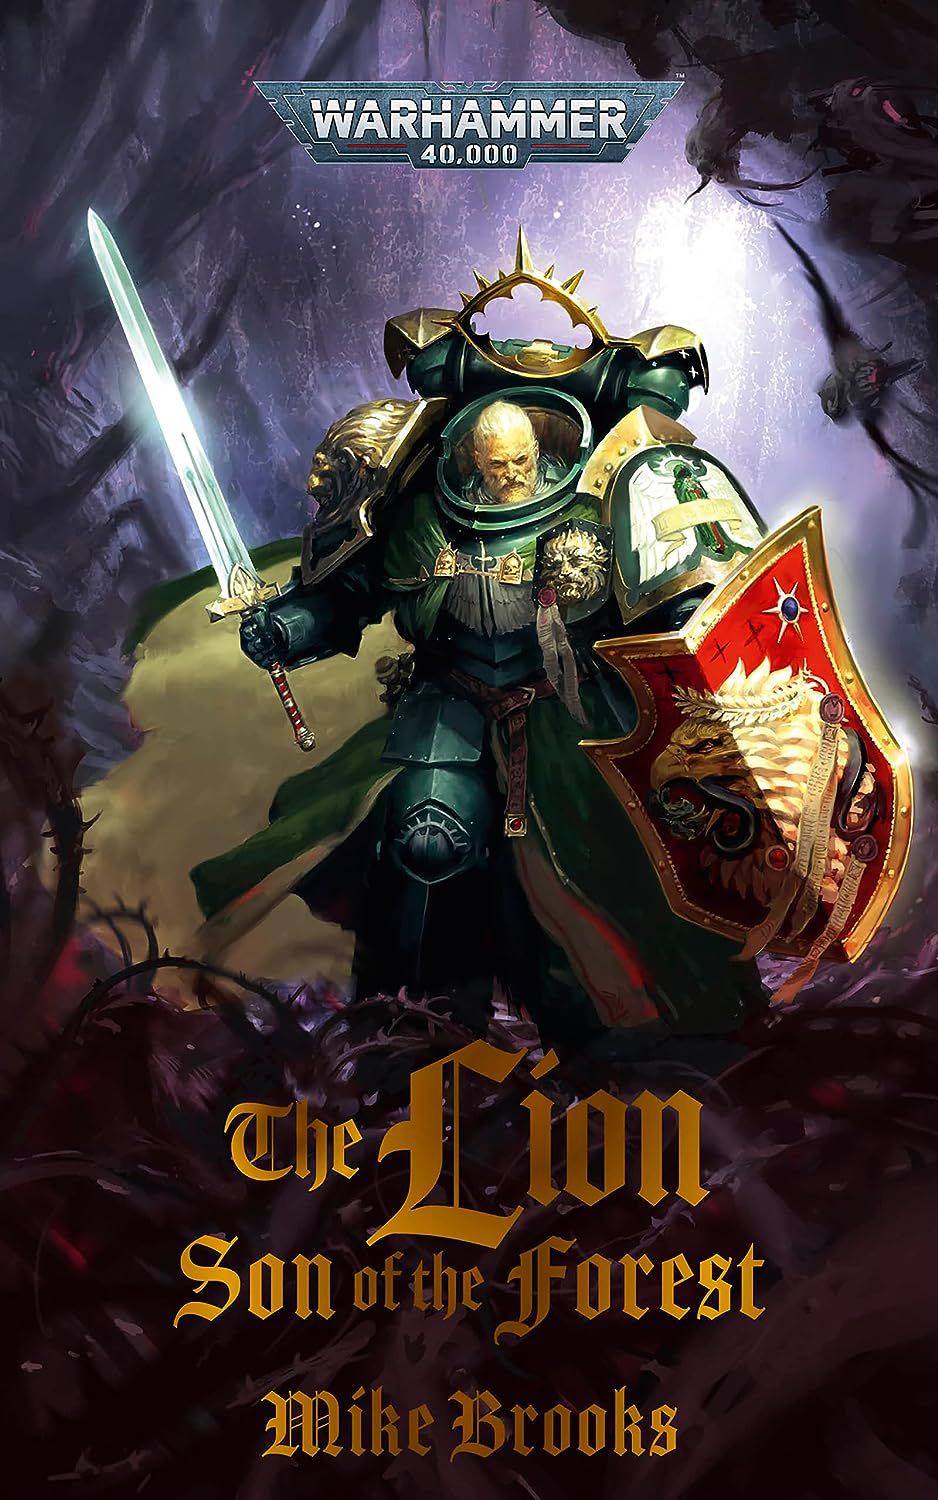 Cover art for The Lion: Son of the Forest by Mike Brooks shows The Lion clad in green armor striding through a purple wood with sword drawn